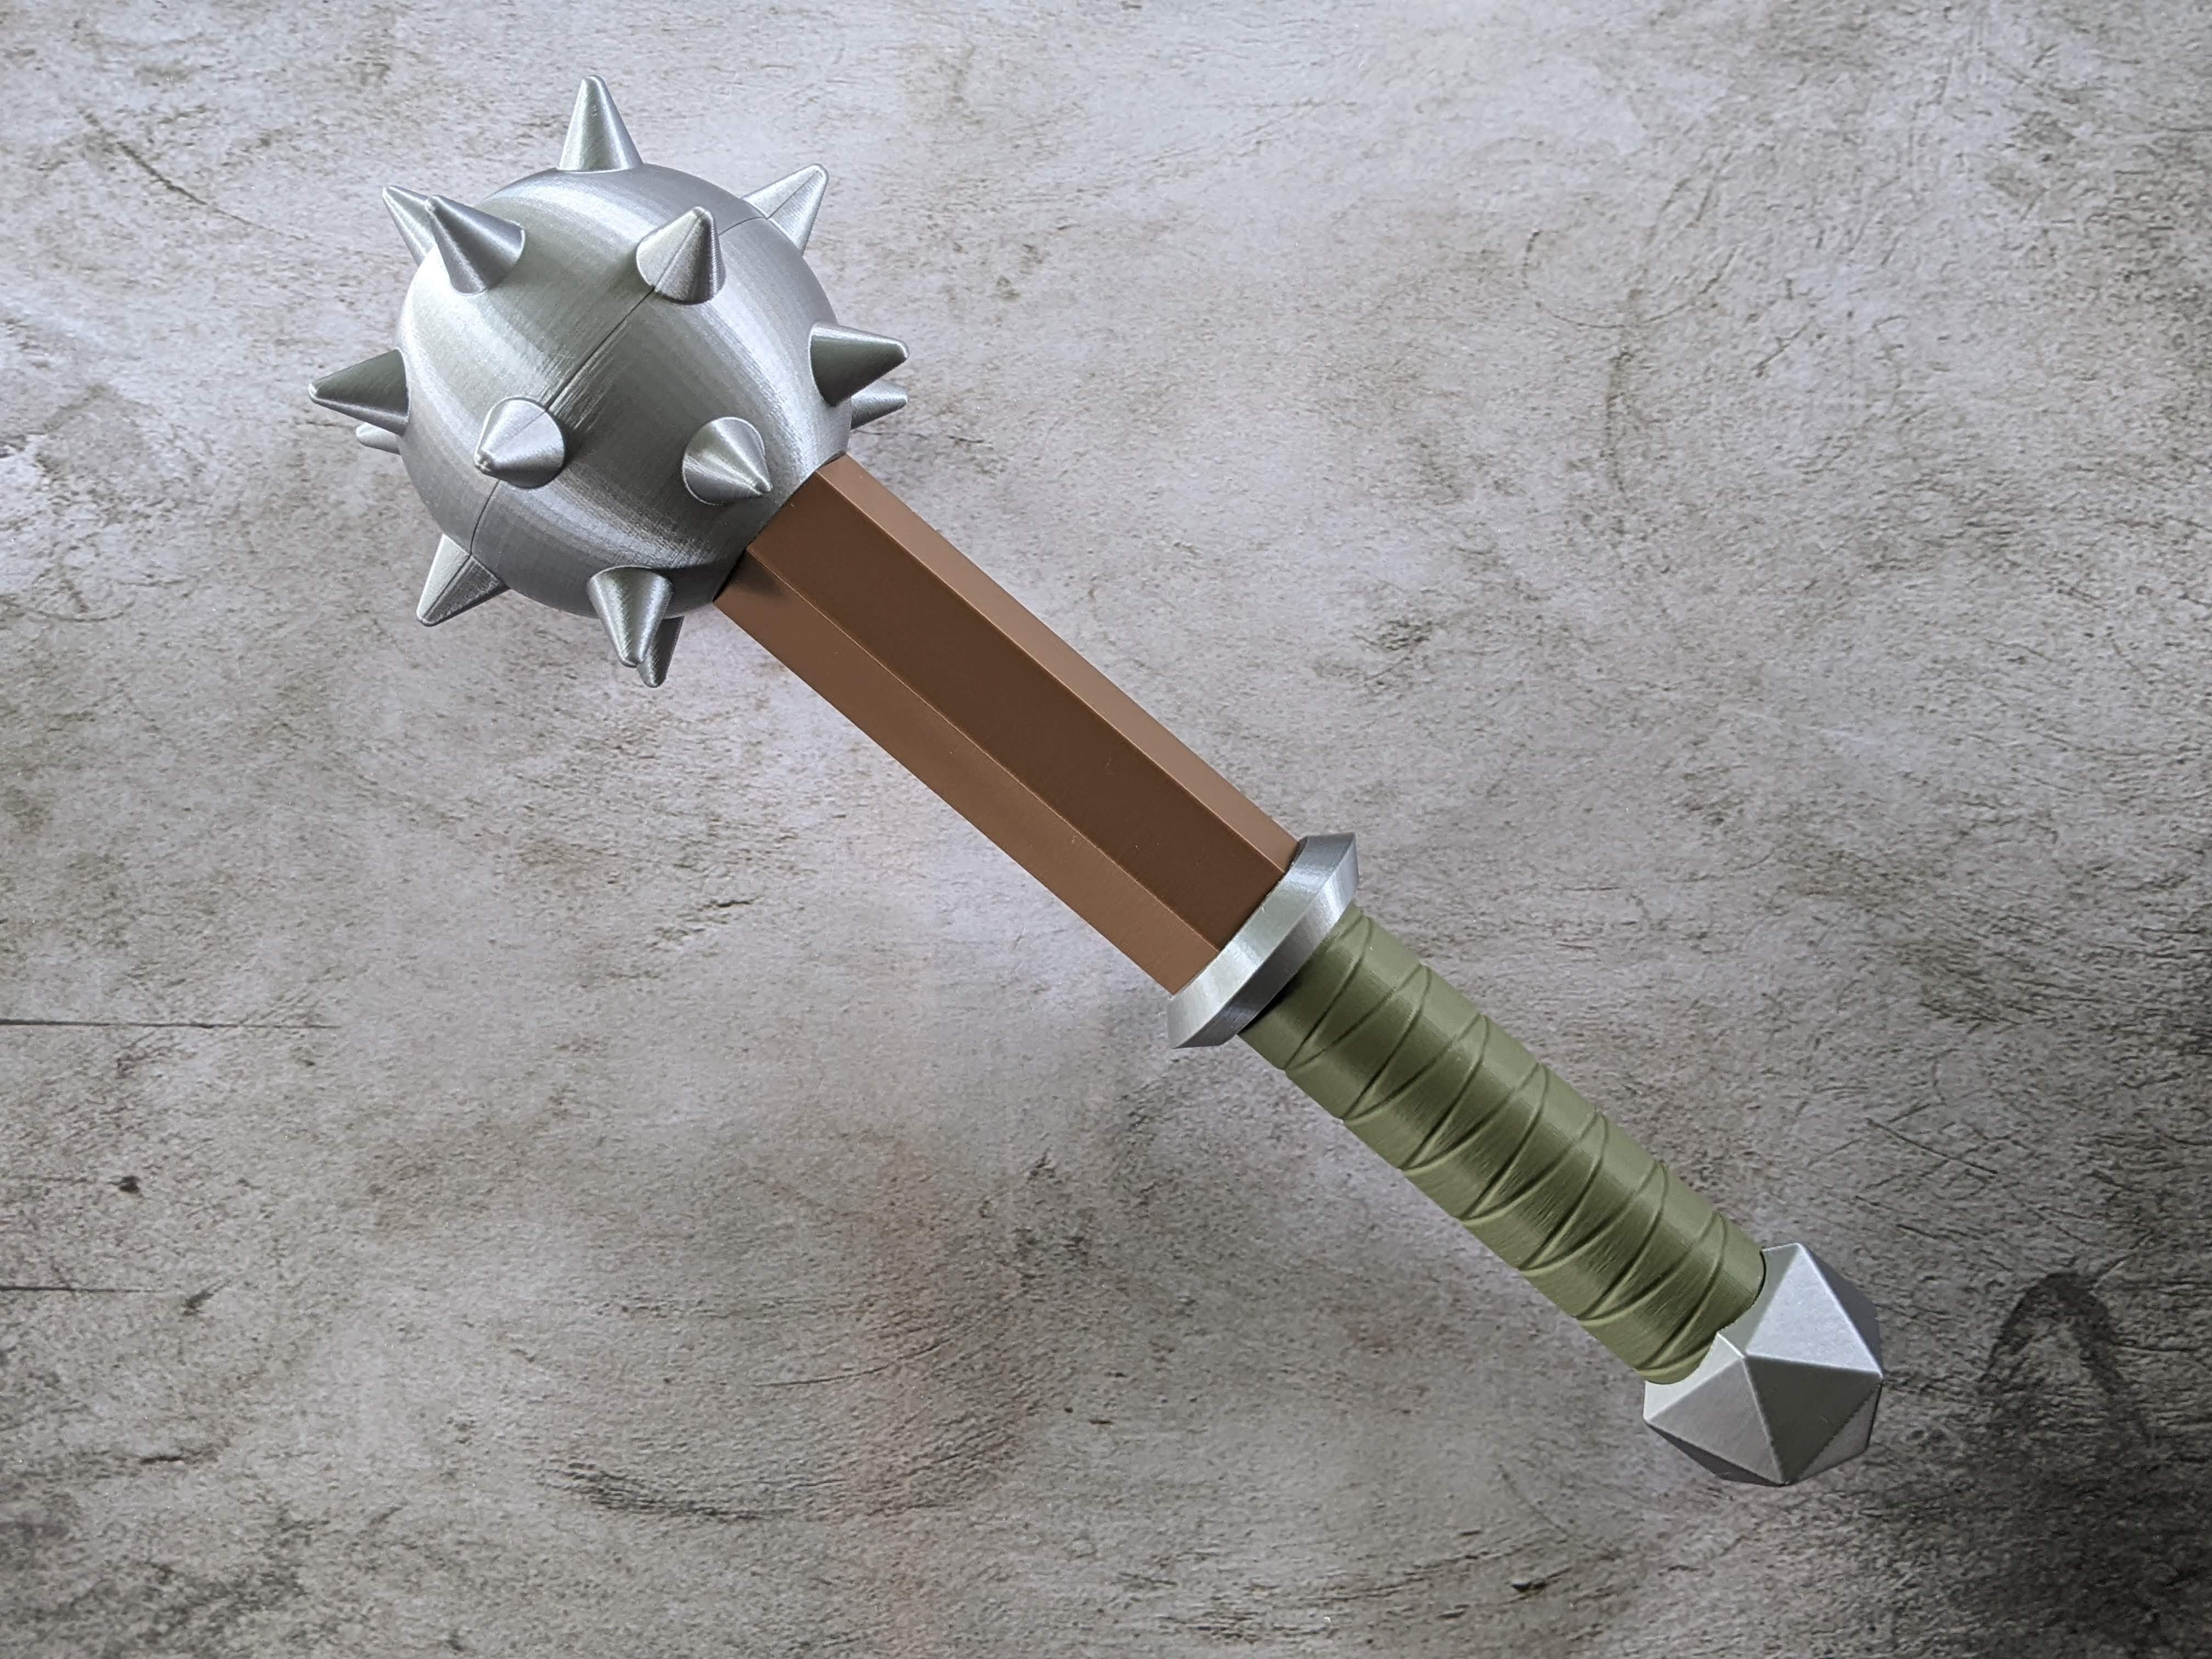 Dice Holding Mace (STL Download)